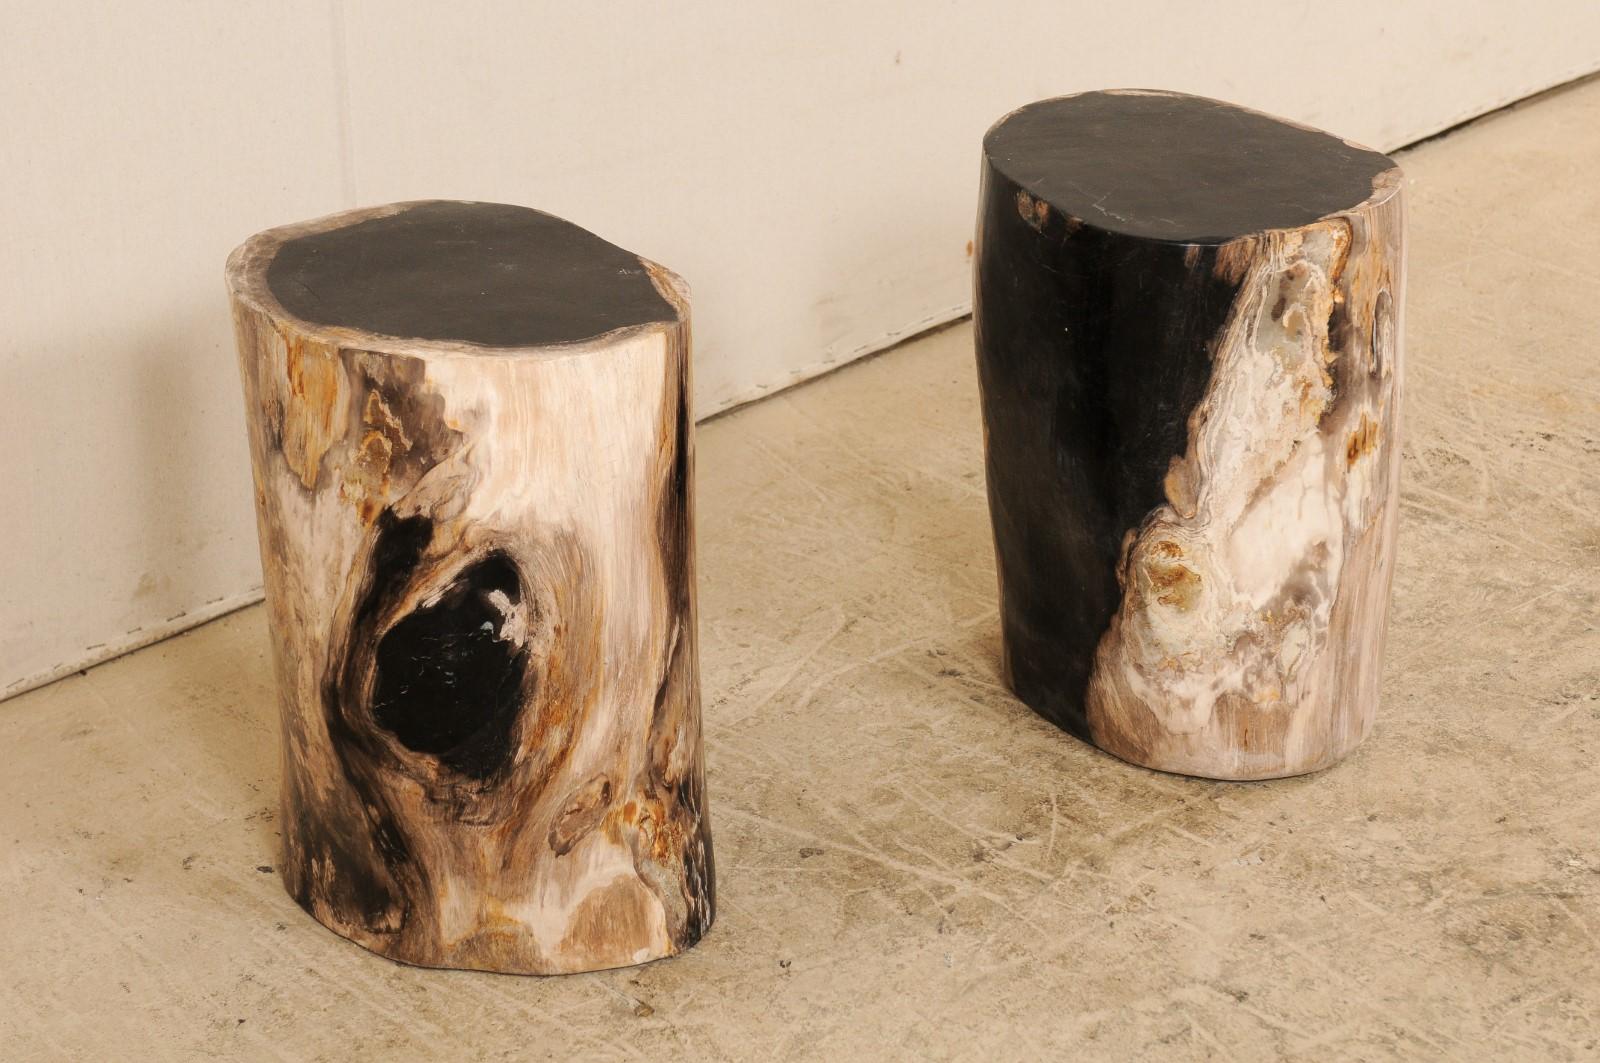 Rustic Pair of Polished Petrified Wood Side Tables or Stools in Cream and Black